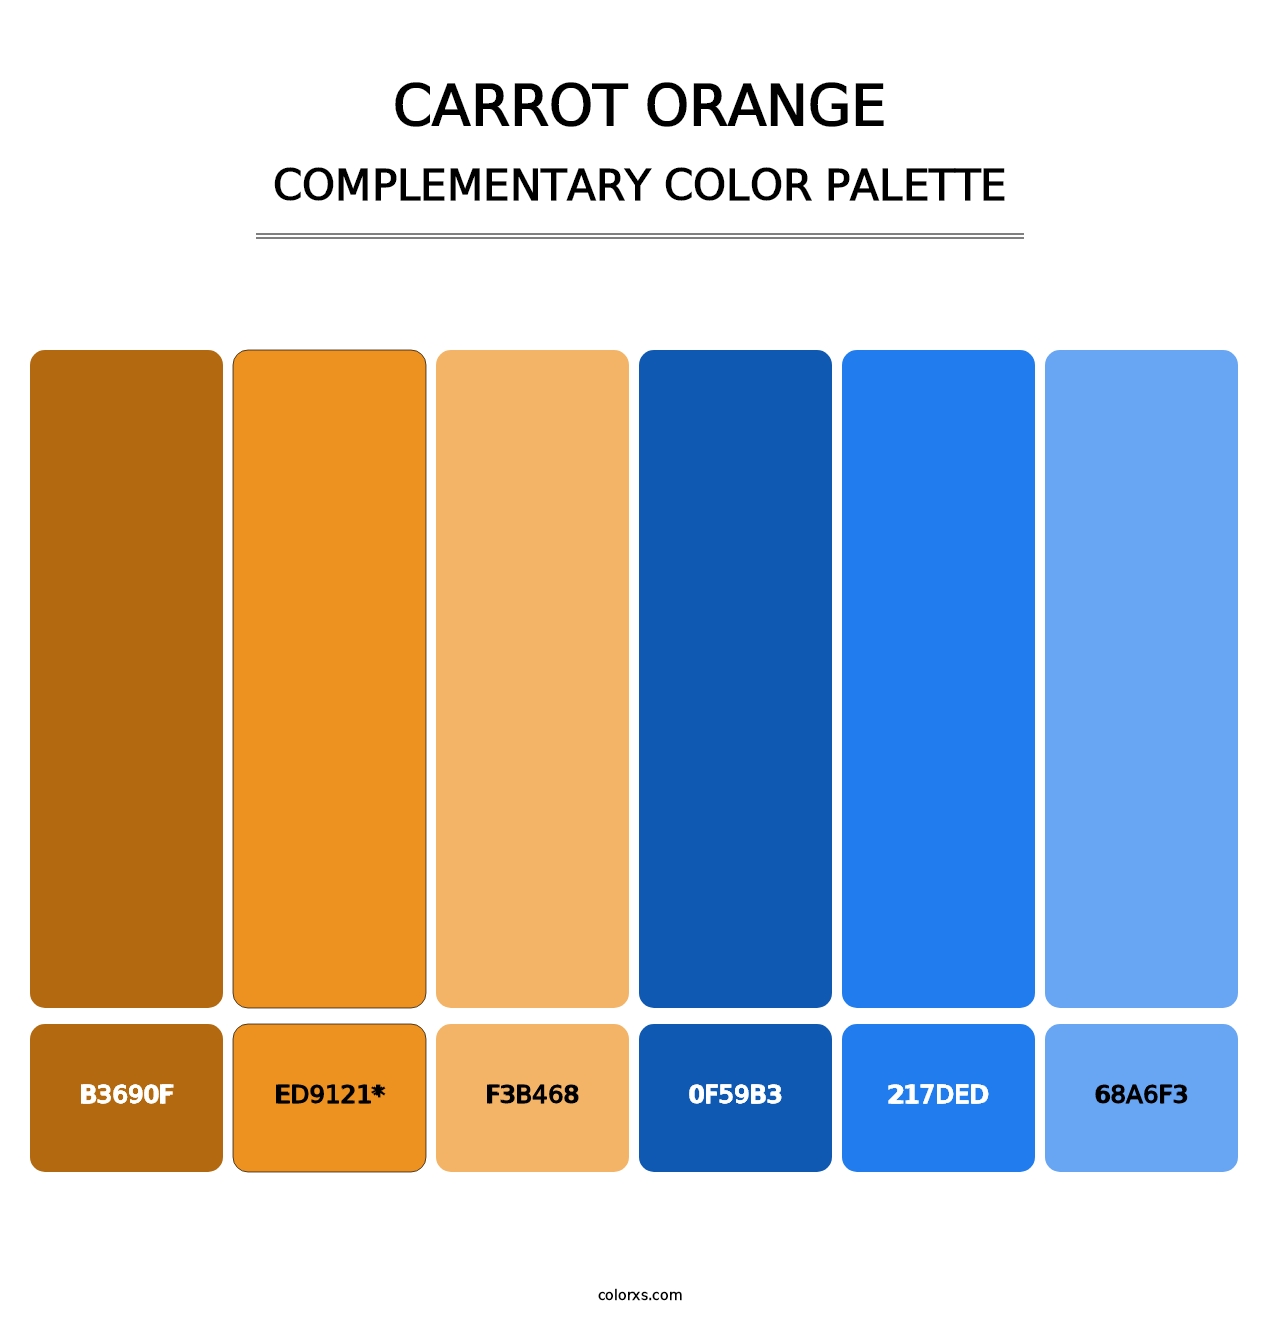 Carrot Orange - Complementary Color Palette